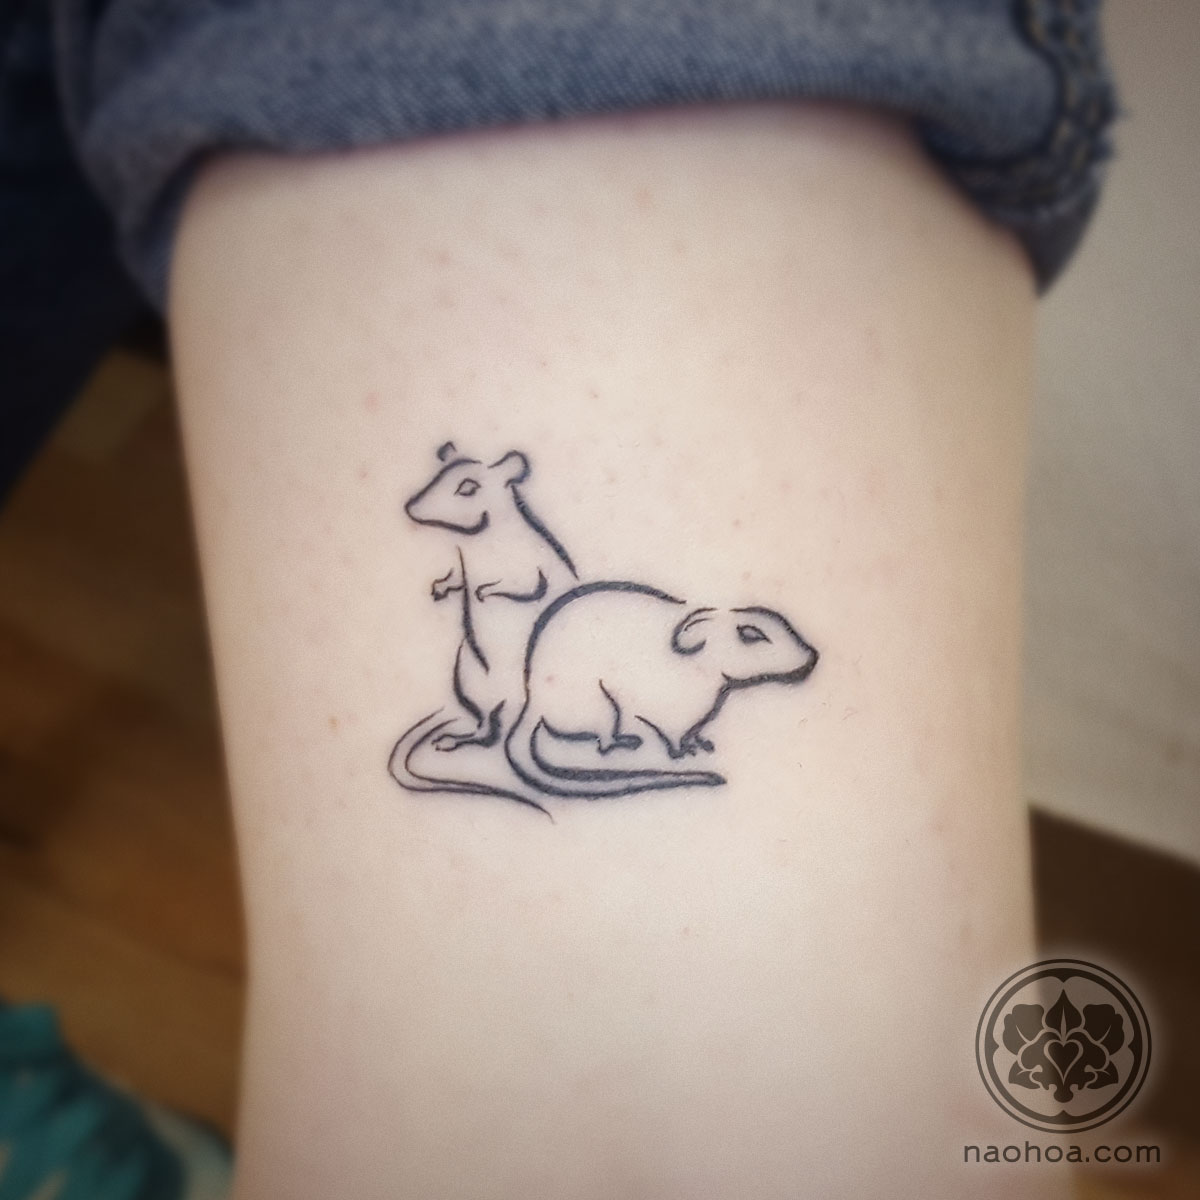 Minimal line tattoo of two rats, based on the client's pets. Designed and tattooed by Naomi Hoang at NAOHOA Luxury Bespoke Tattoos, Cardiff (Wales, UK).